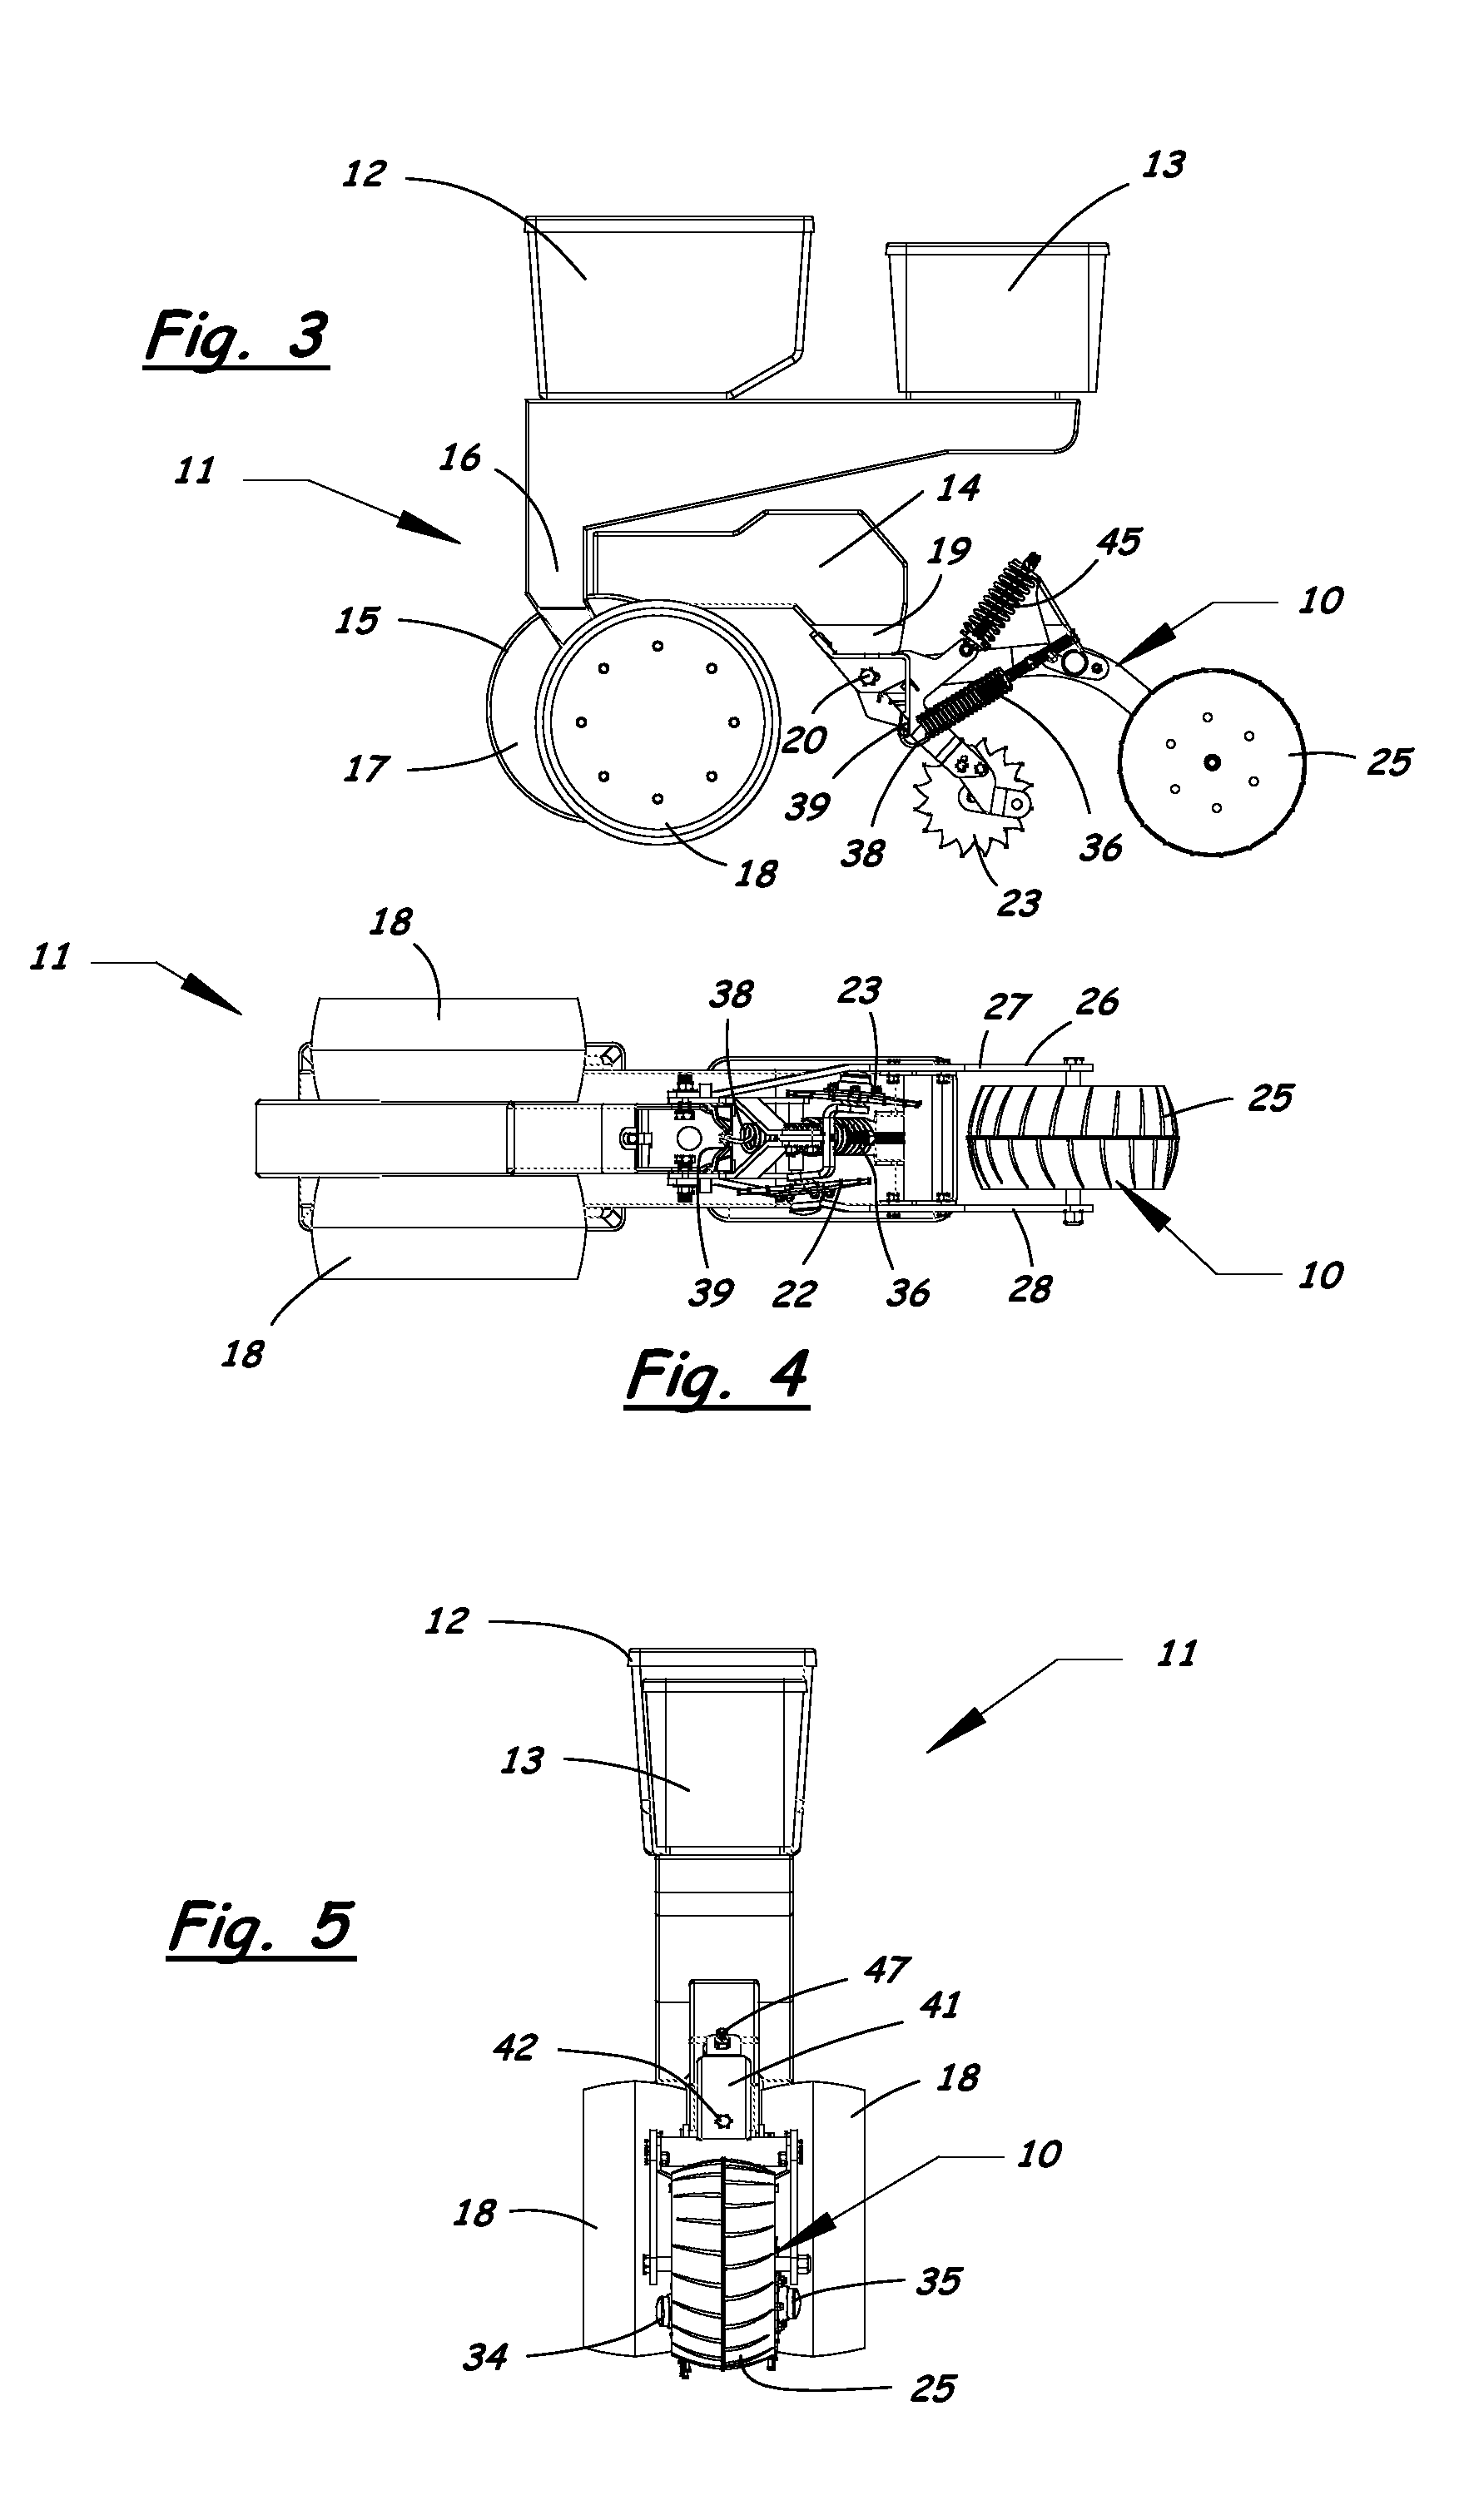 Furrow closing assembly and method